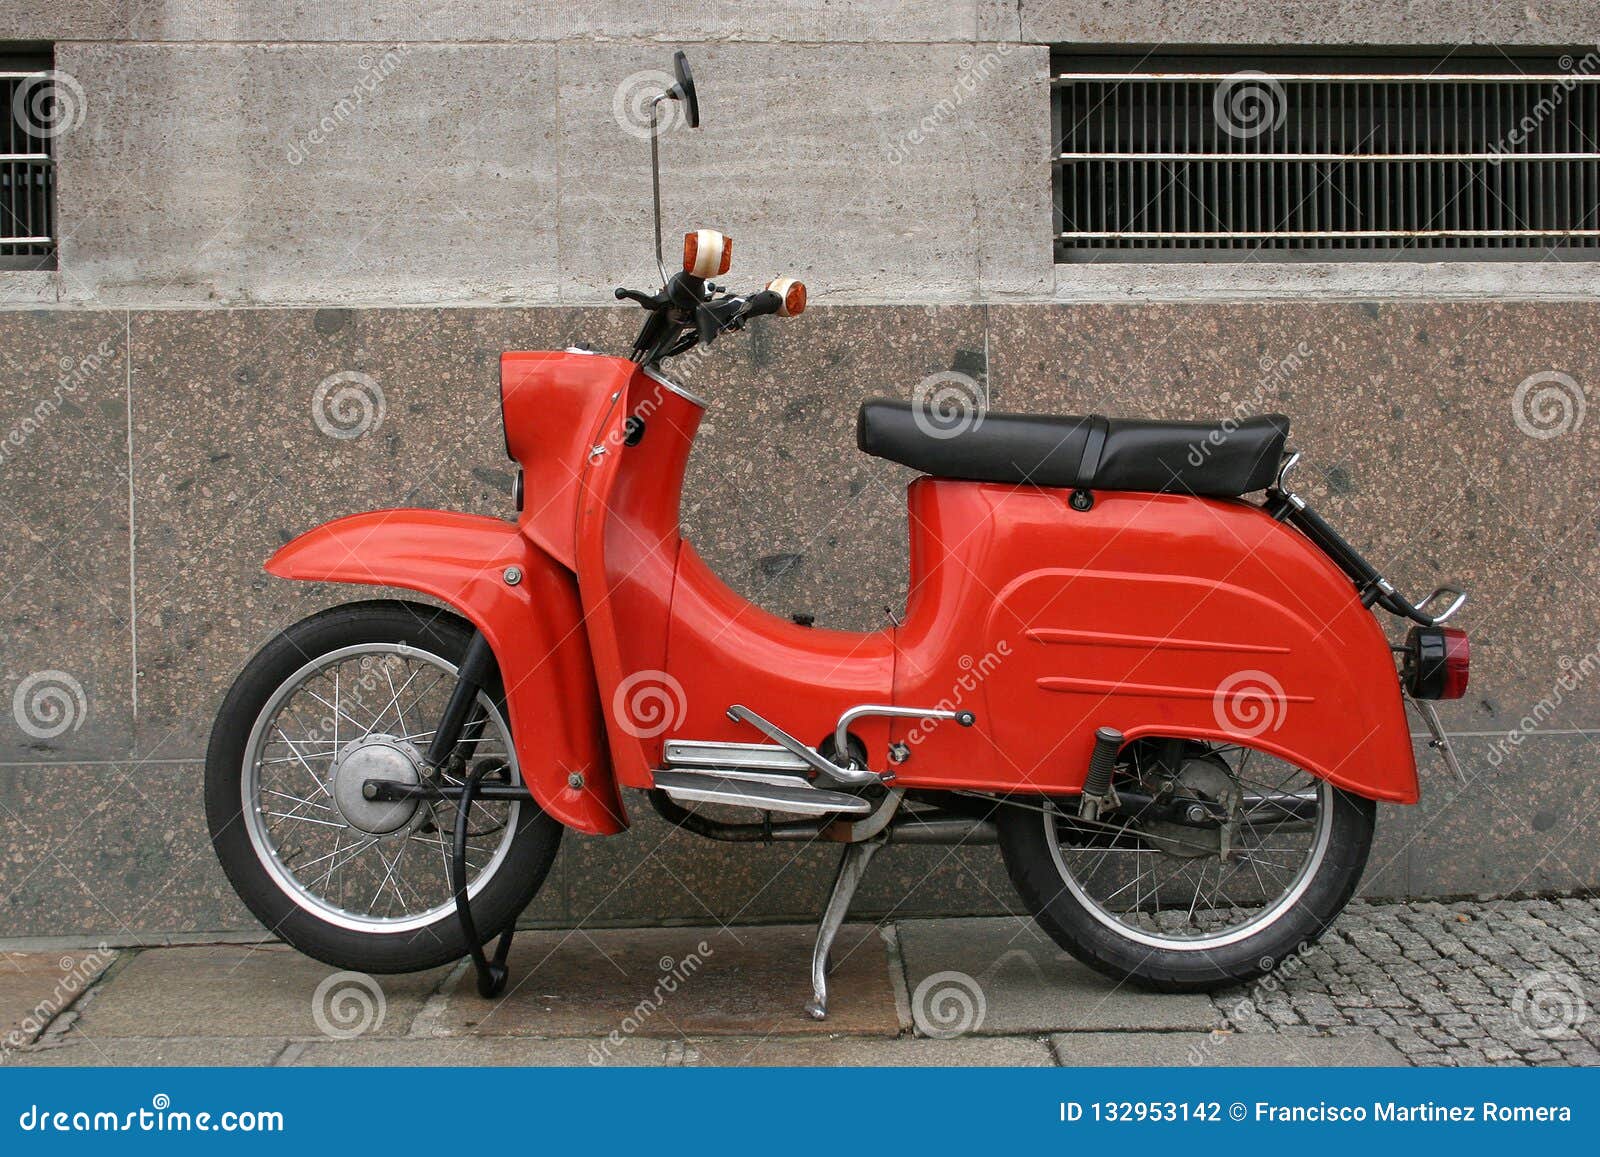 old motorcycle of the old ddr